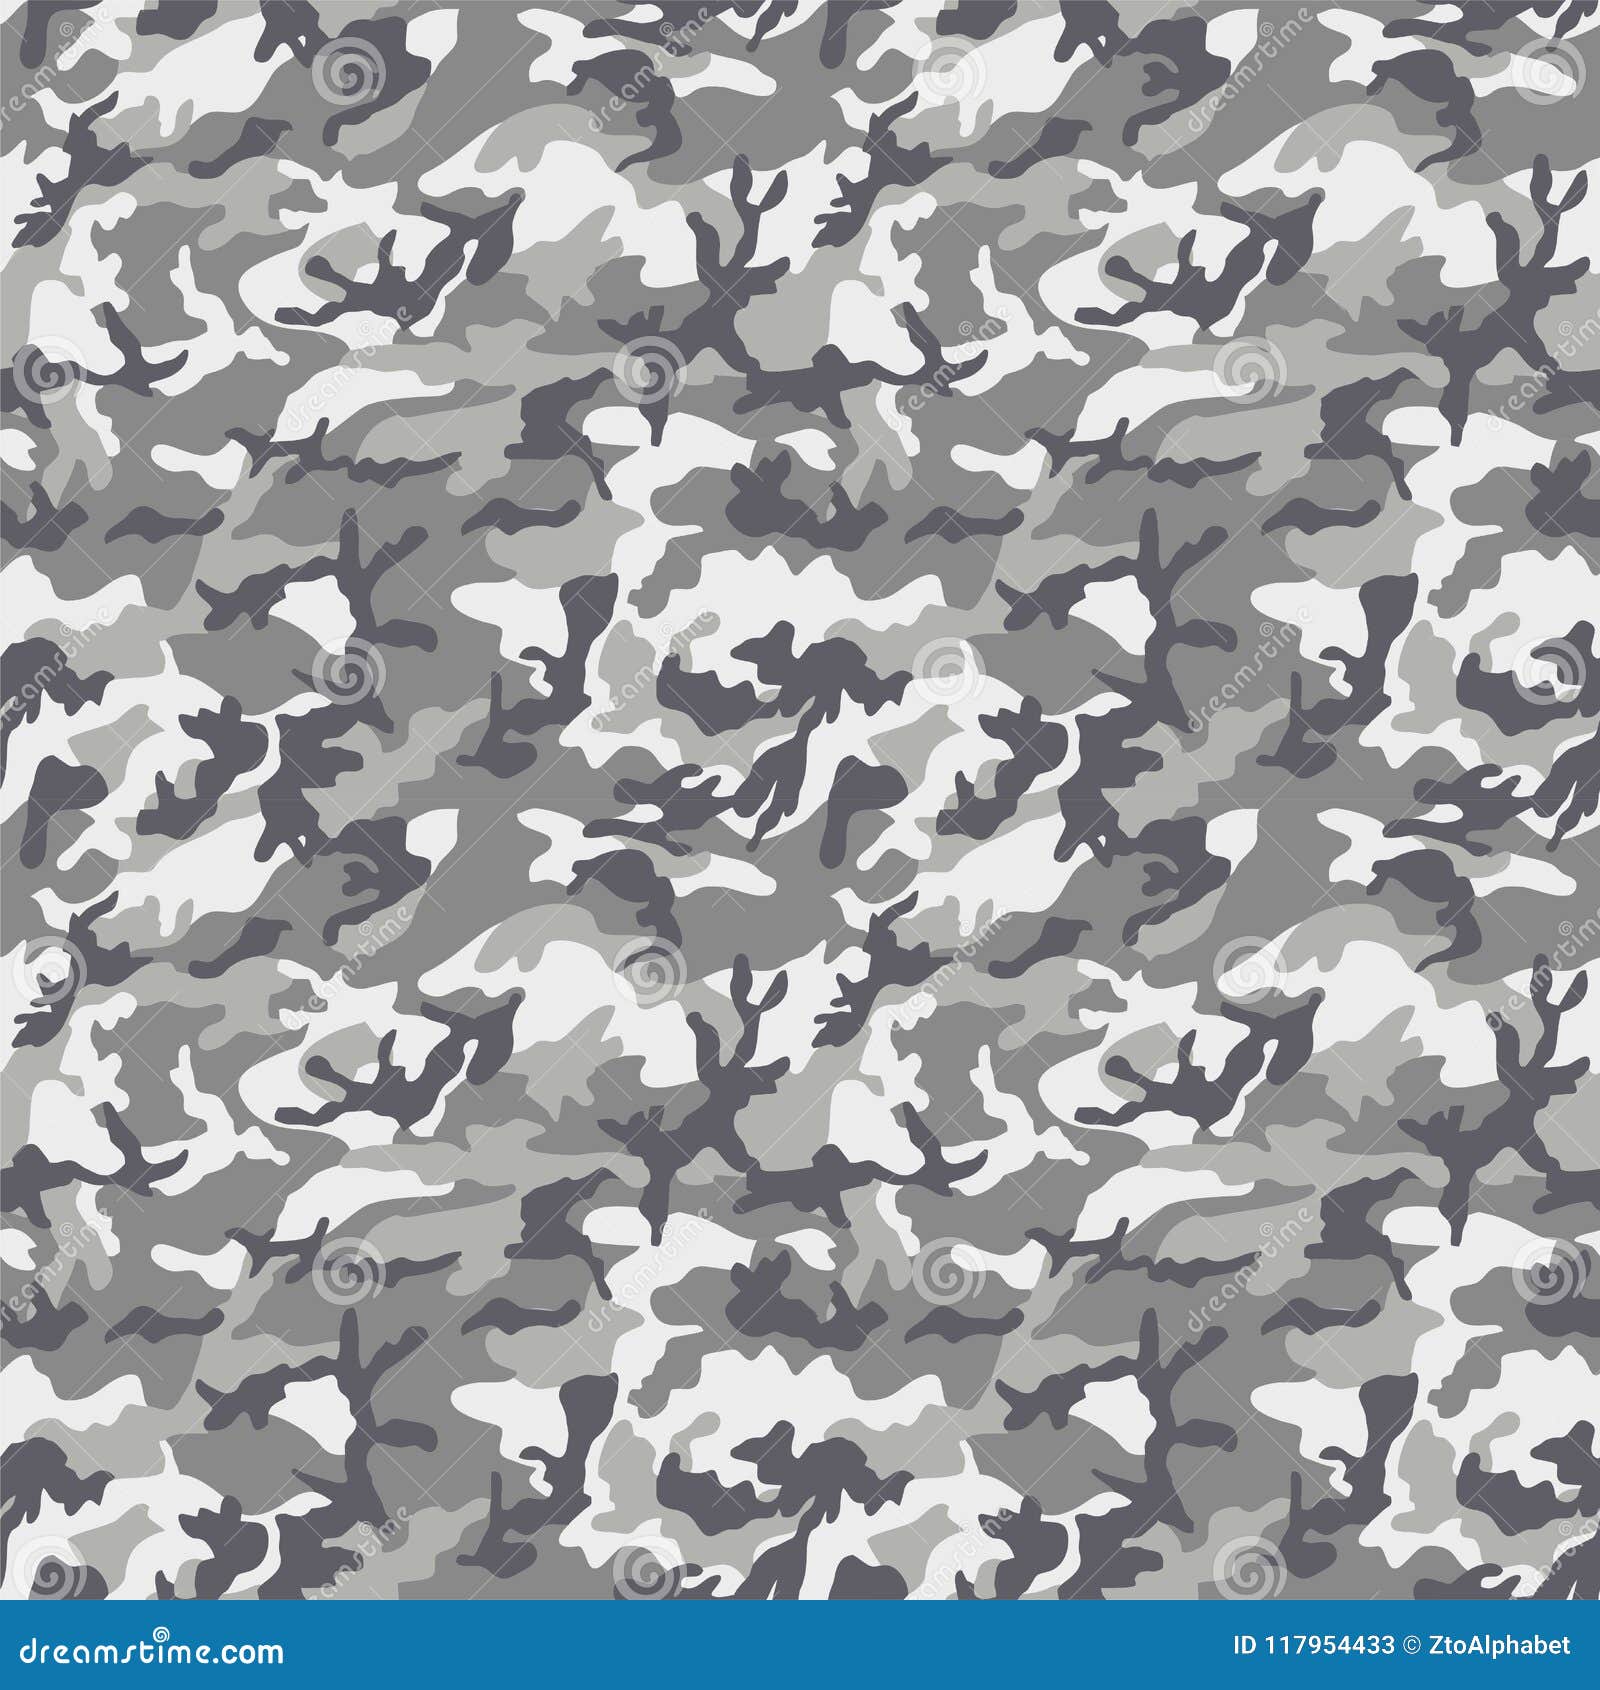 https://thumbs.dreamstime.com/z/concept-design-illustration-vector-new-abstract-urban-camo-army-seamless-gray-abstract-pattern-urban-camouflage-seamless-gray-117954433.jpg